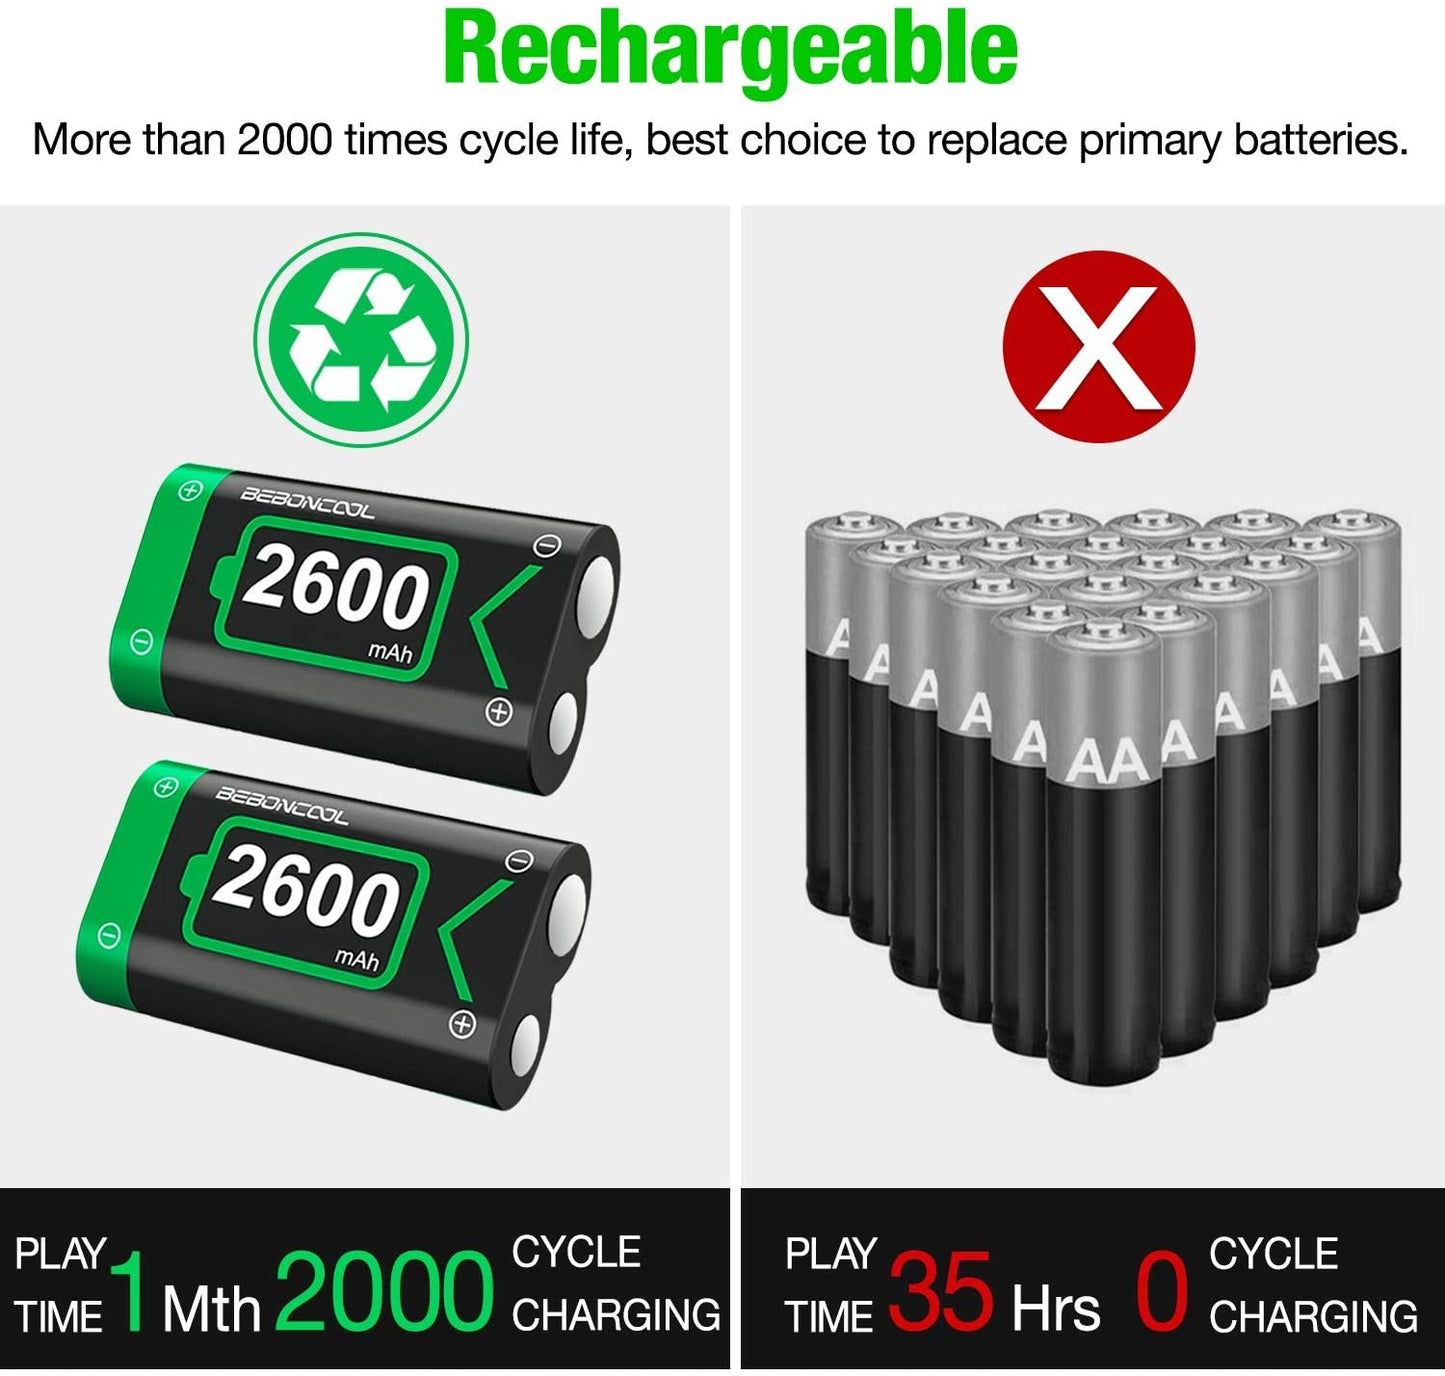 3PC Rechargeable Battery Pack for Gaming Controllers